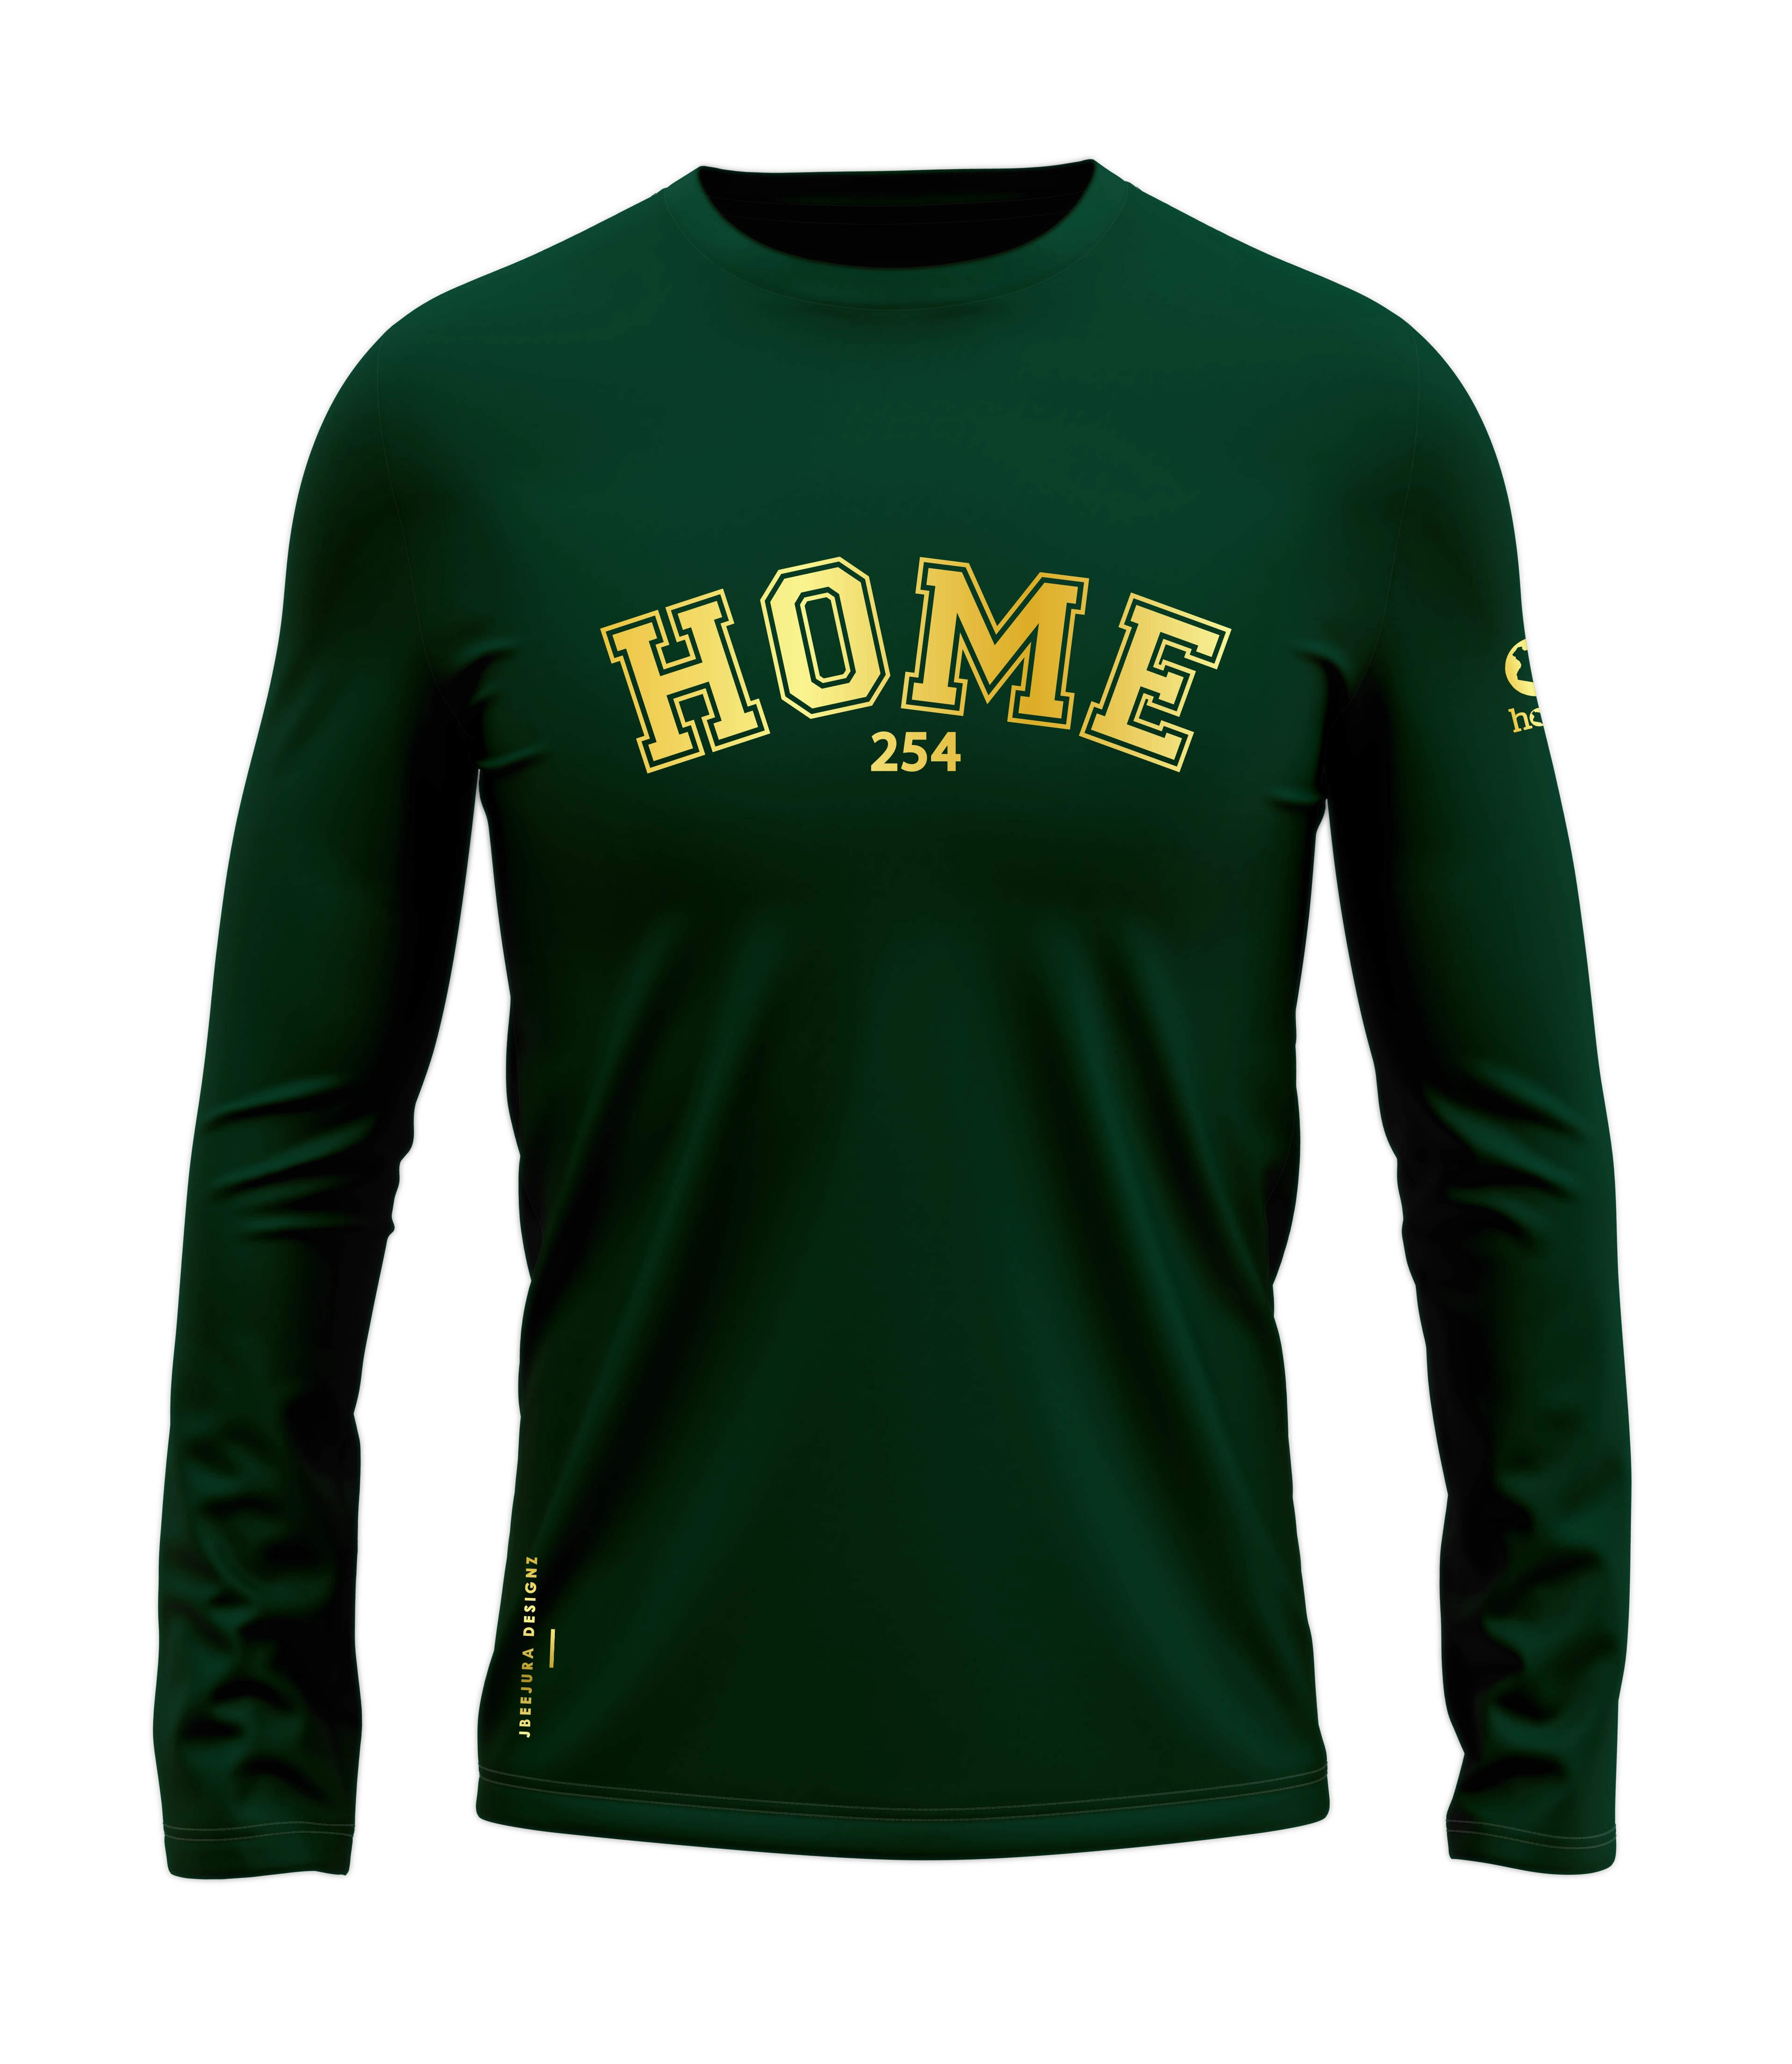 home_254 LONG-SLEEVED RICH GREEN T-SHIRT WITH A GOLD COLLEGE PRINT – COTTON PLUS FABRIC